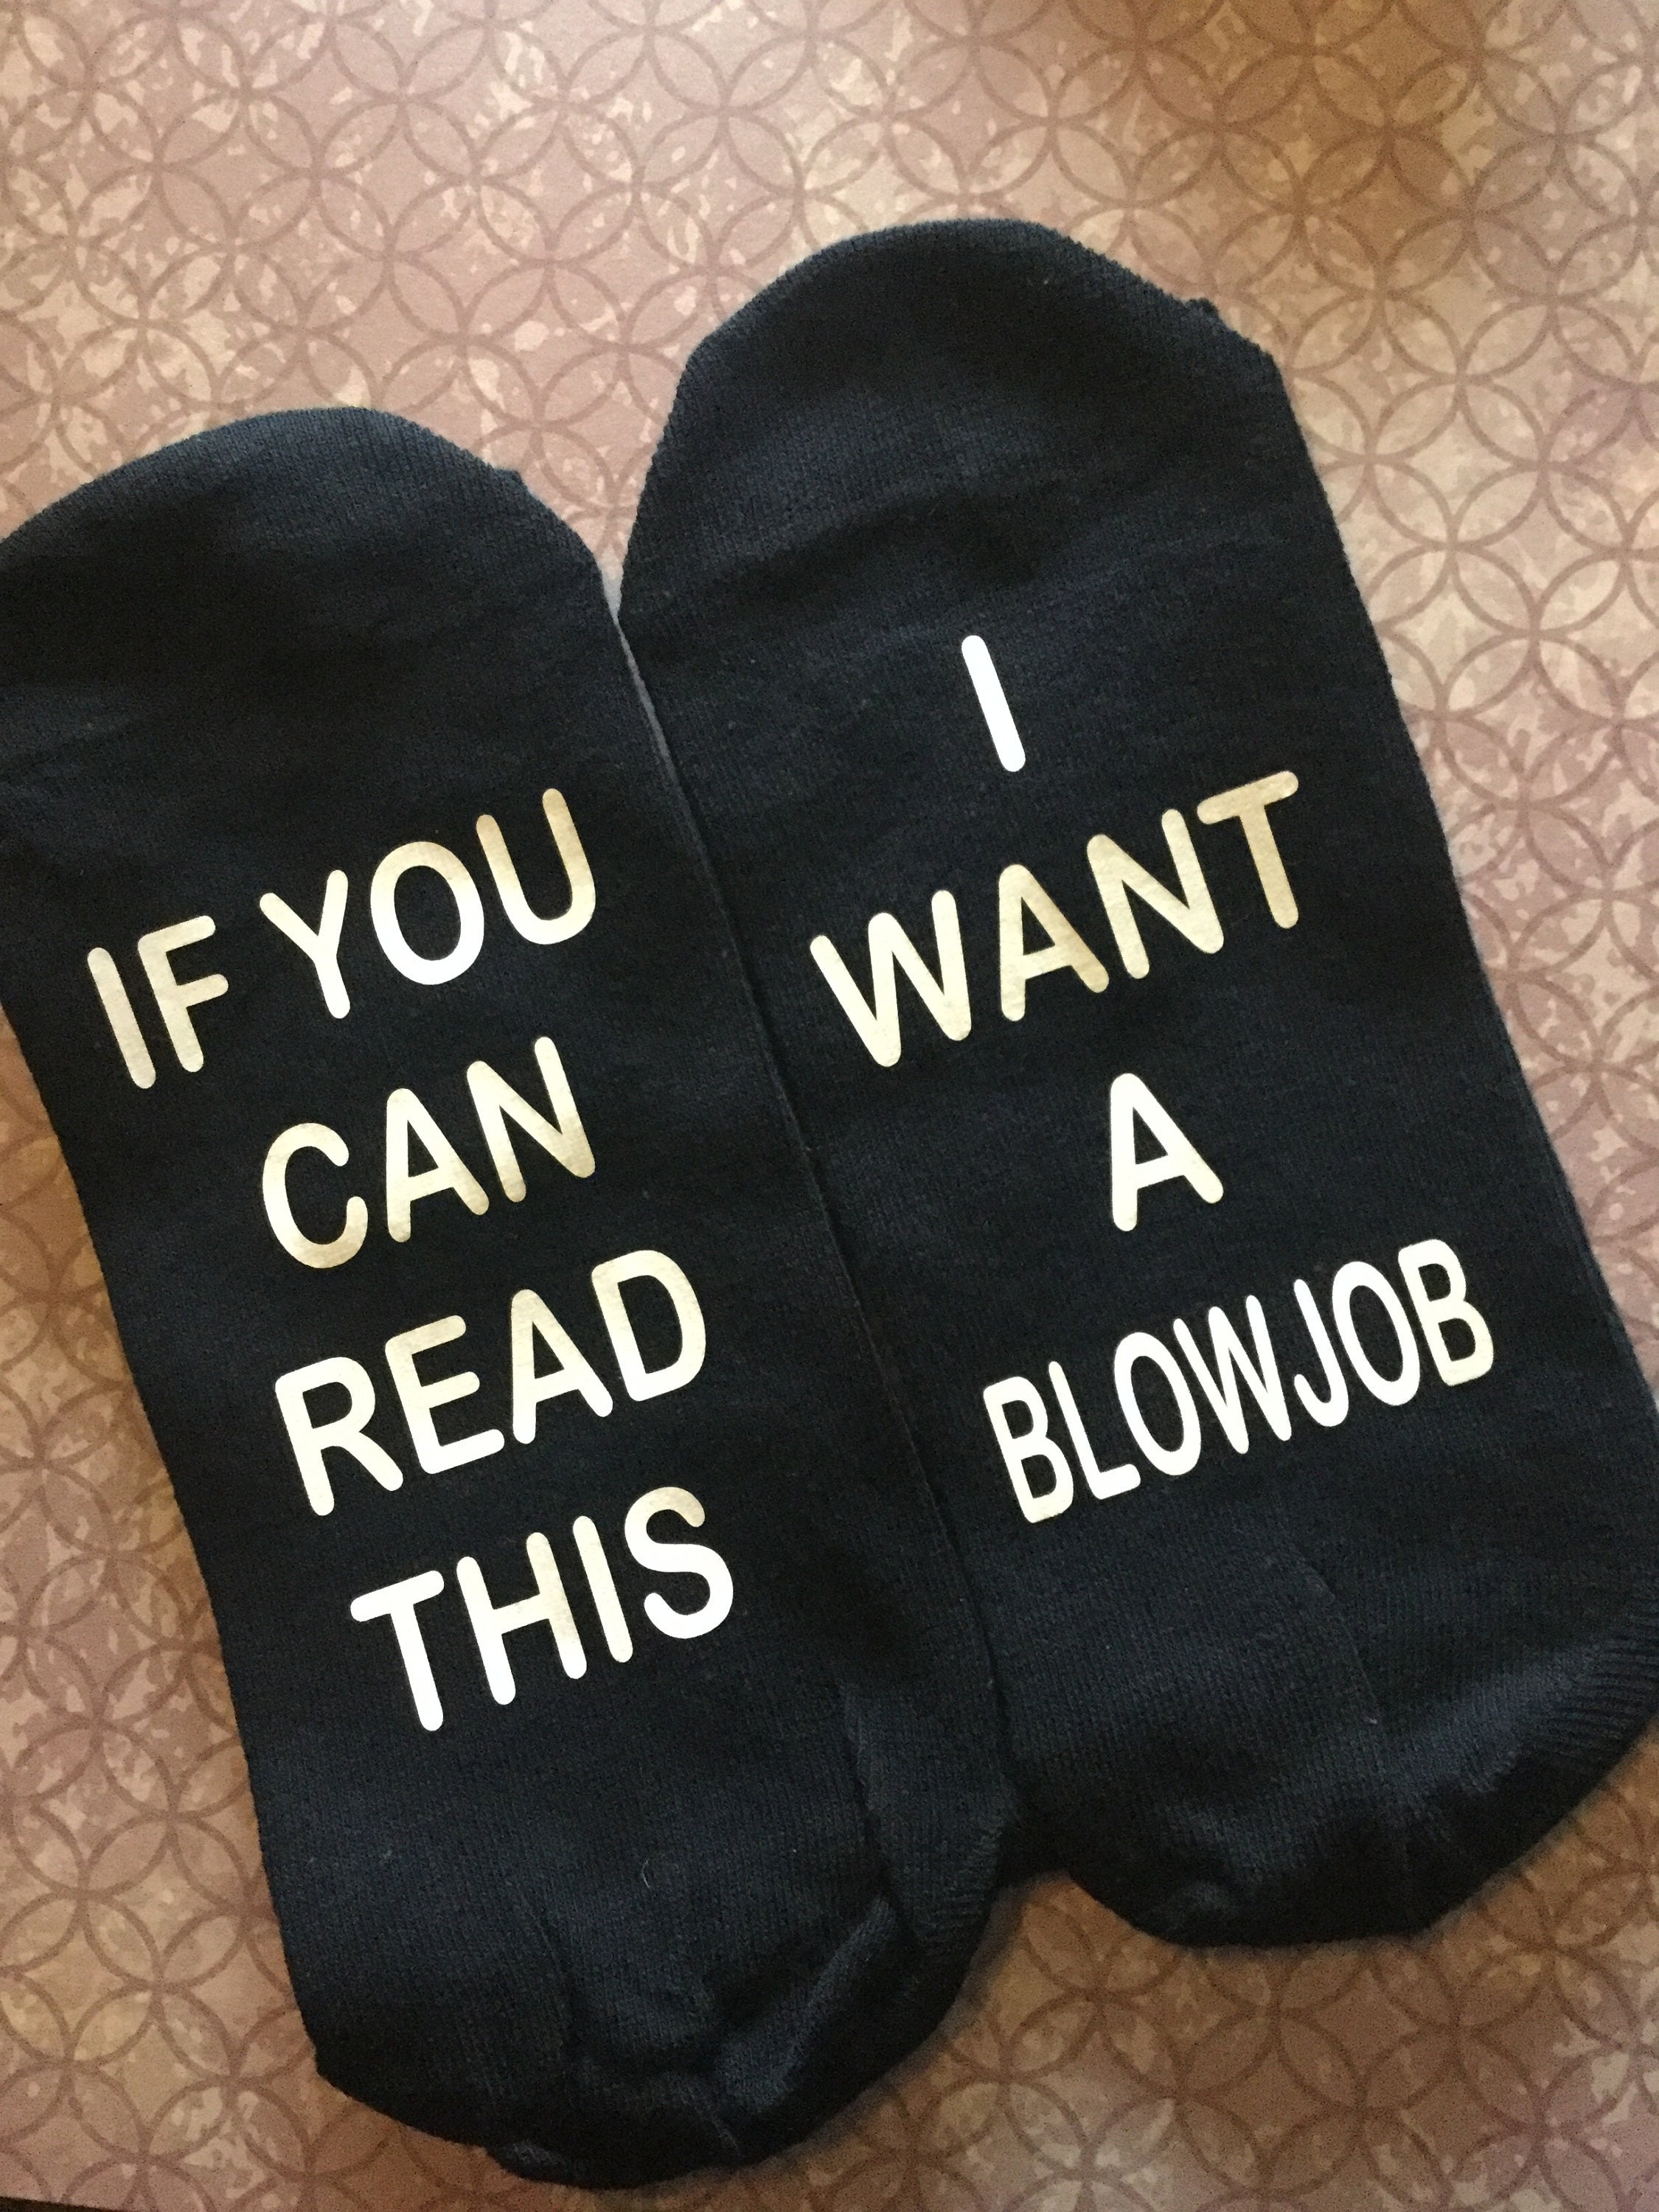 Novelty socks If you can read this I want a blowjob rude | Etsy